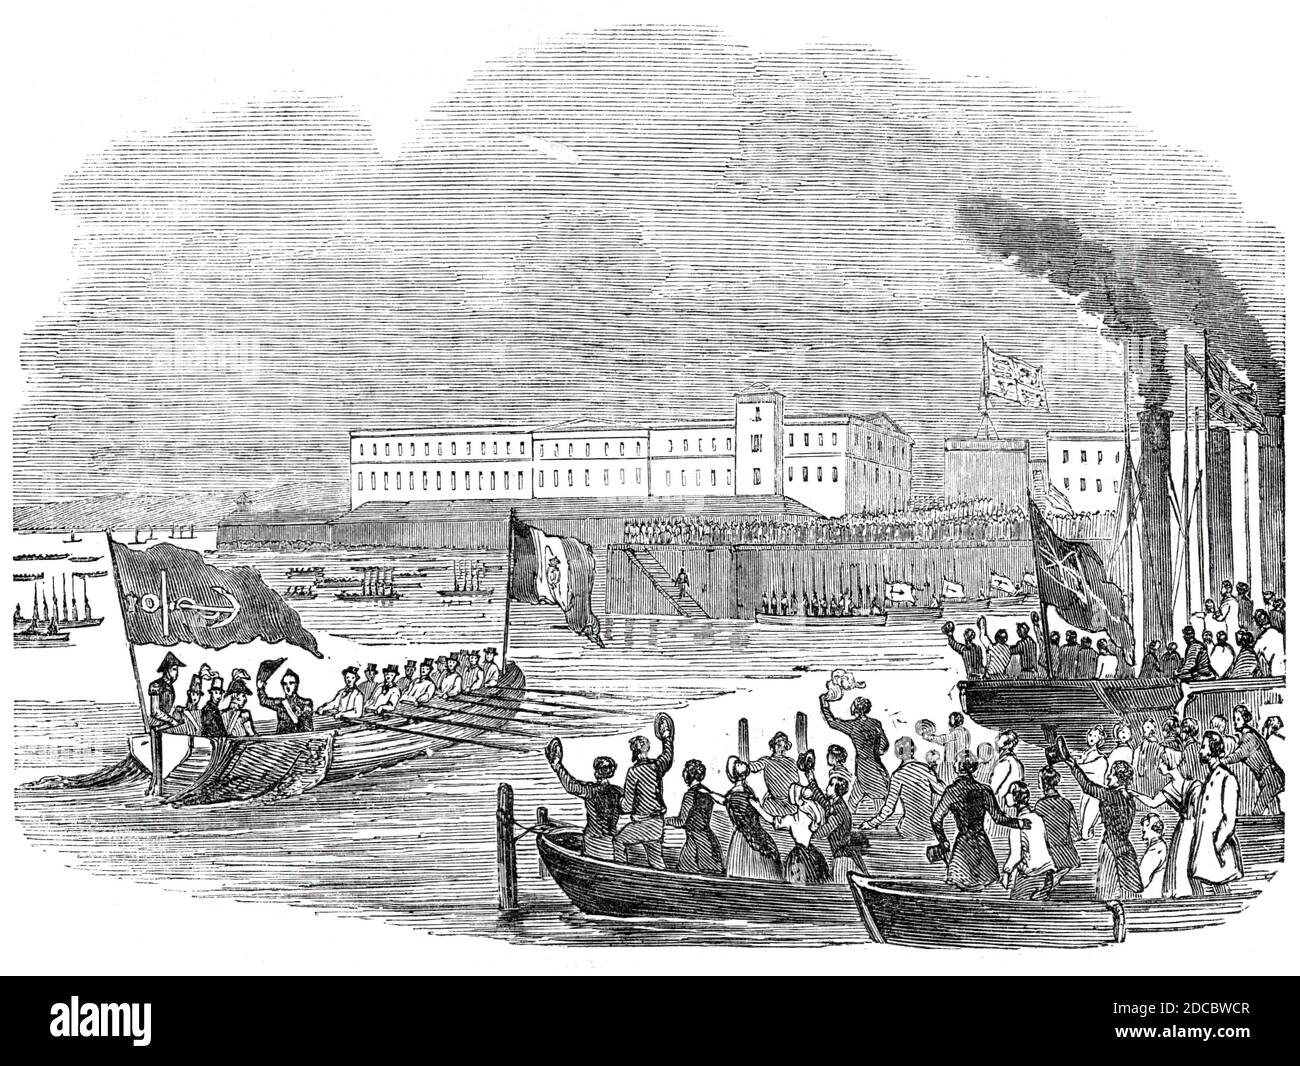 The Debarkation, 1844. The French king Louis Philippe arrives at Portsmouth: 'The royal and distinguished party moved towards the gangway in order to descend to the boat which was to convey them on shore; and here a friendly contest prevailed for a moment between the King of the French and Prince Albert, as to which should have the pleasure of giving precedence to the other. The Prince, however, was persevering enough to gain his point, and so the King was the first to descend the gangway, followed by Prince Albert, the Duke de Montpensier, and the Duke of Wellington.From &quot;Illustrated Lon Stock Photo